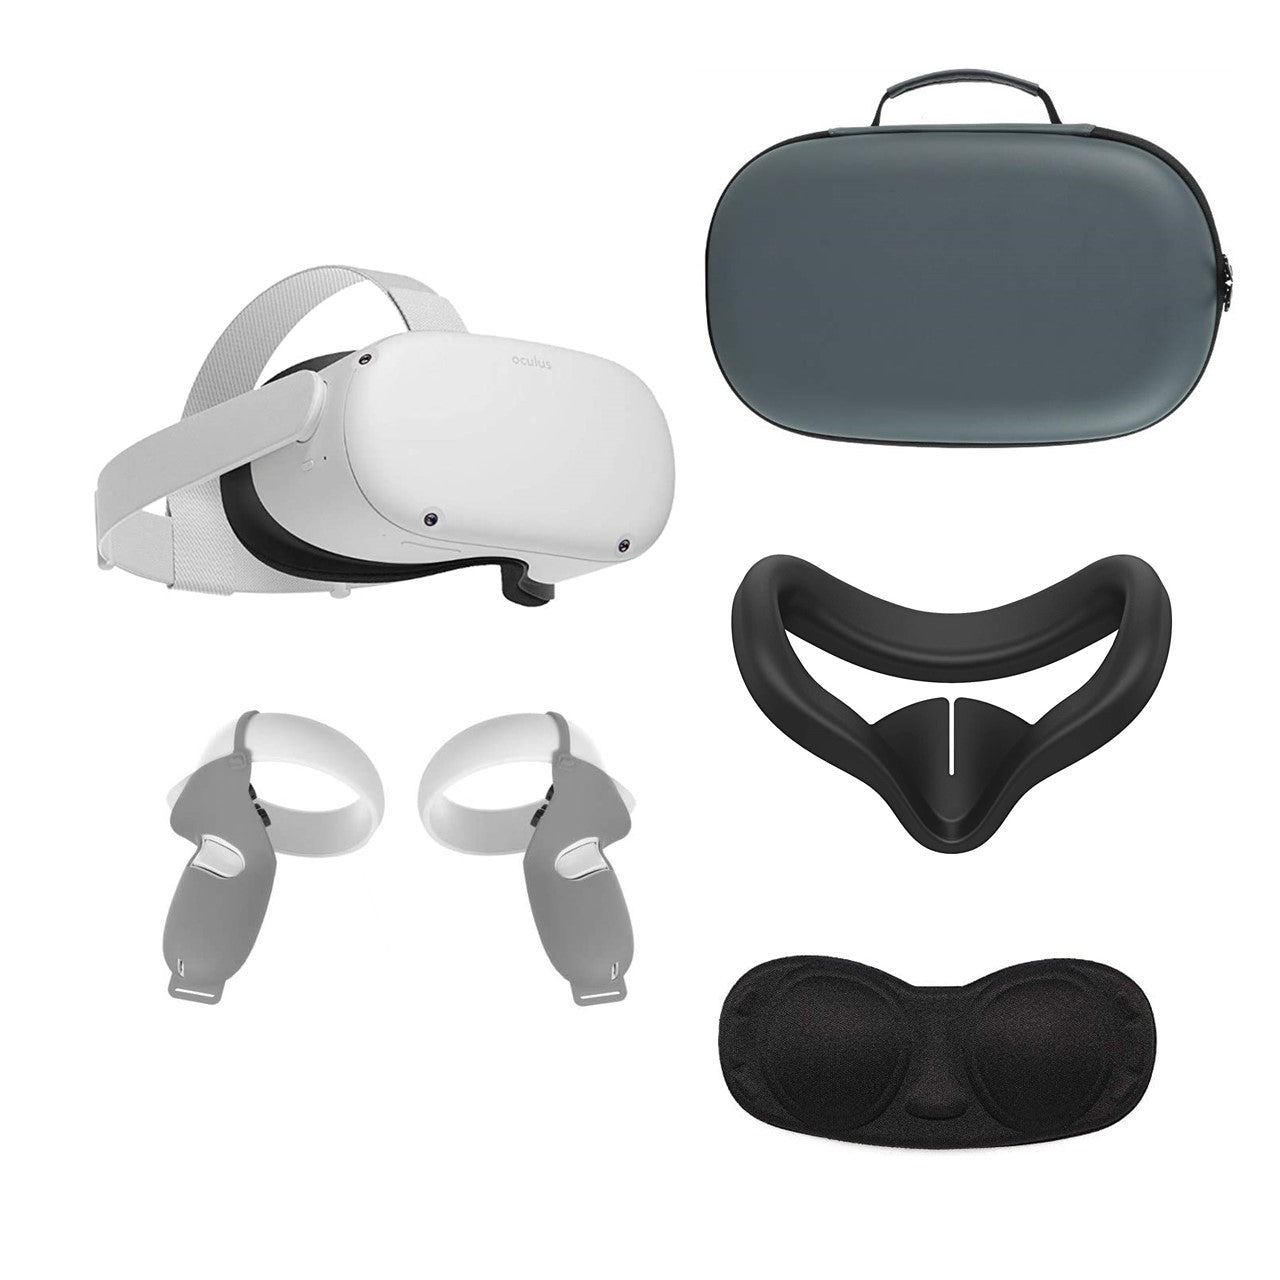 2021 Oculus Quest 2 All-In-One VR Headset 128GB, Touch Controllers, 1832x1920 up to 90 Hz Refresh Rate LCD, 3D Audio, Mytrix Carrying Case, Gray Grip Cover, Lens Cover, Silicone Face Cover